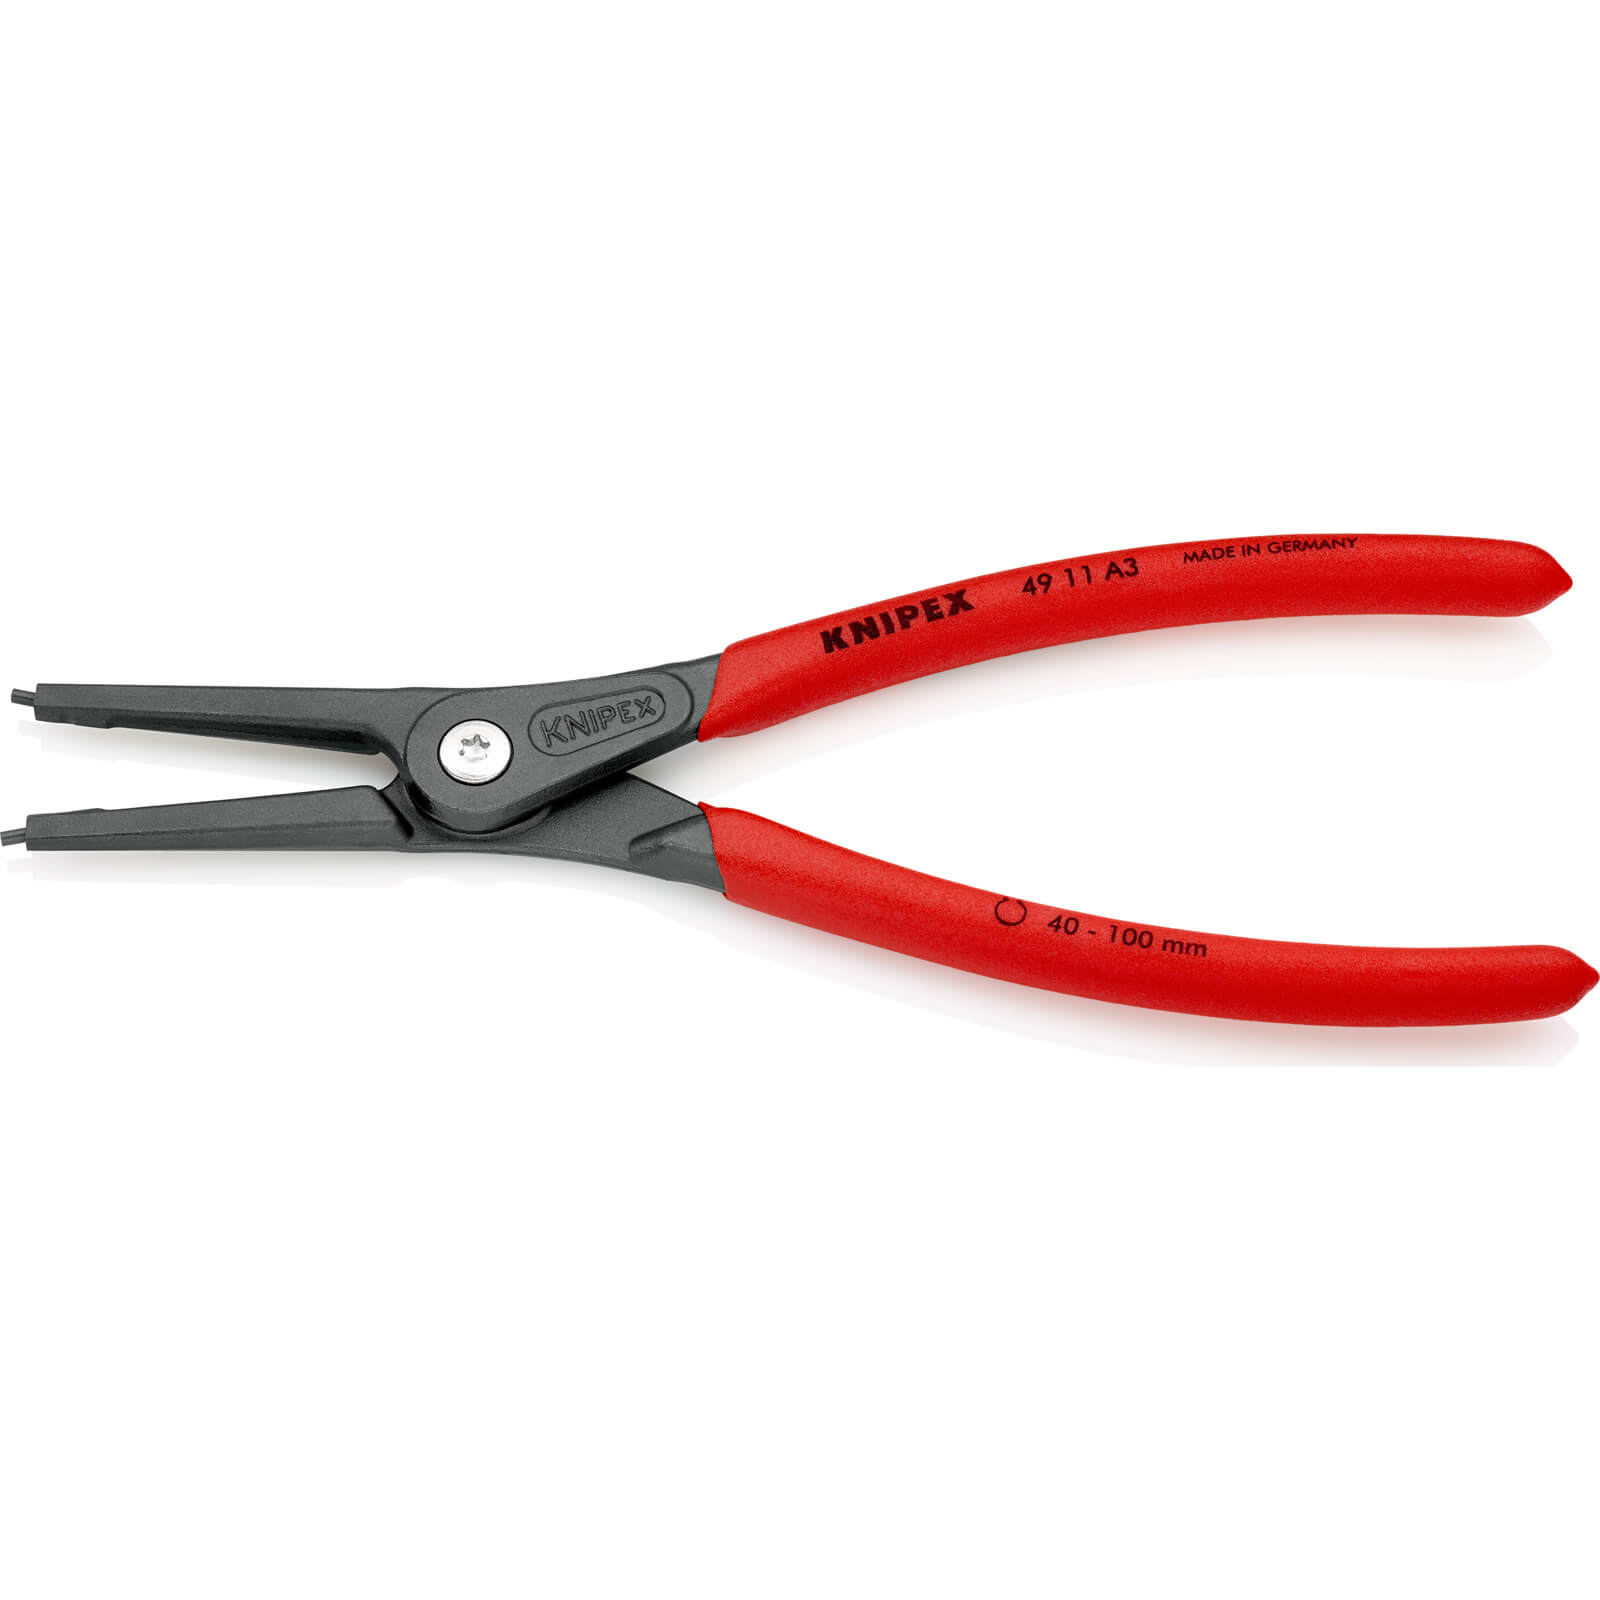 Image of Knipex 49 11 External Straight Precision Circlip Pliers 40mm - 100mm